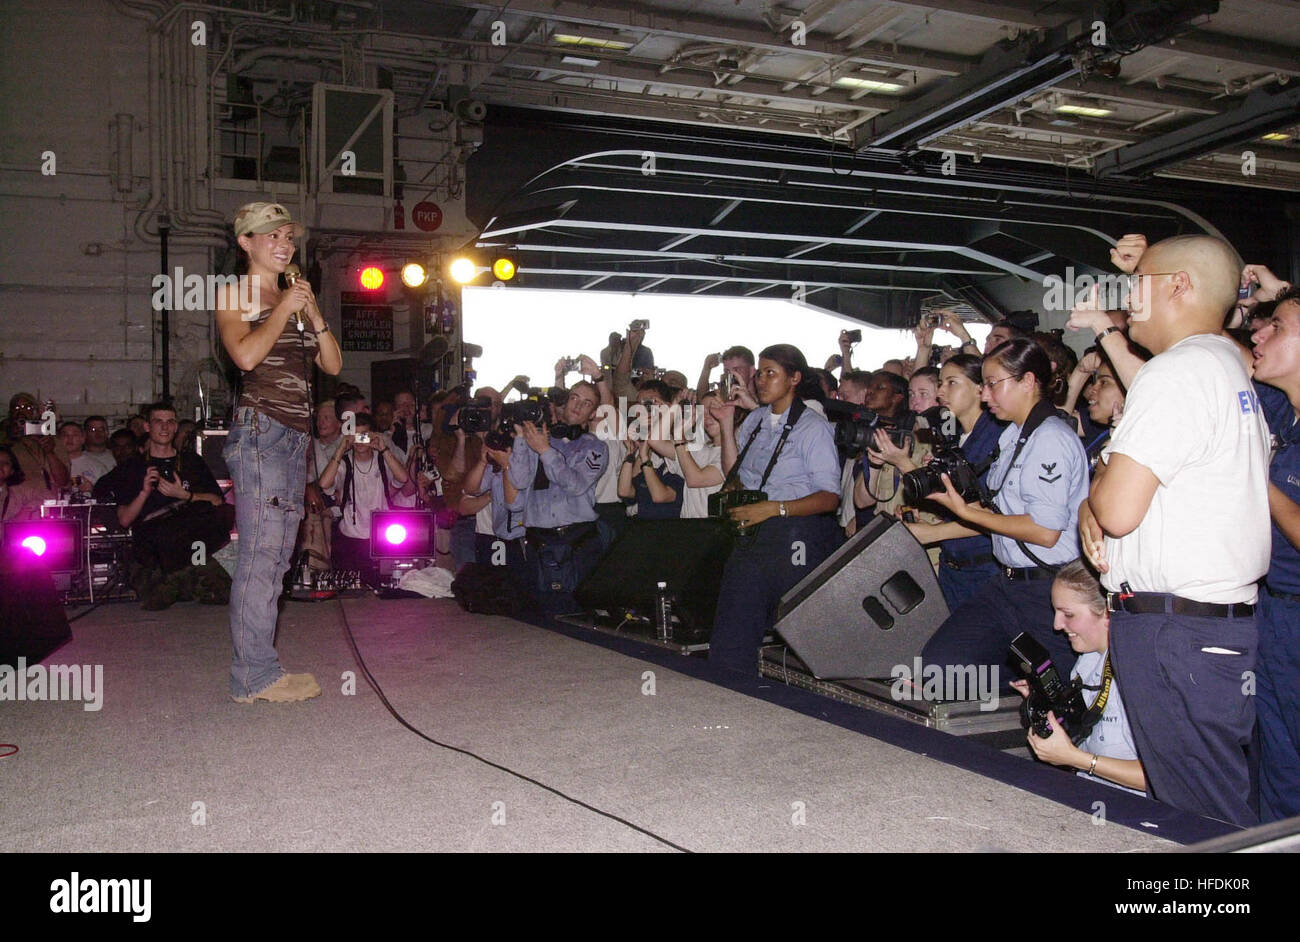 030619-N-2143T-003 The Arabian Gulf (Jun. 19, 2003) -- Actress Alyssa Milano speaks to sailors at the United Service Organization (USO) show during a visit aboard USS Nimitz (CVN 68).  Nimitz Carrier Strike Force and Carrier Air Wing Eleven (CVW-11) are deployed in support of Operation Iraqi Freedom.  Operation Iraqi Freedom is the multi-national coalition effort to liberate the Iraqi people, eliminate IraqÕs weapons of mass destruction, and end the regime of Saddam Hussein.  U.S. Navy photo by Airman Maebel Tinoko.  (RELEASED) Alyssa Milano visits USS Nimitz, june 2003 uncropped Stock Photo